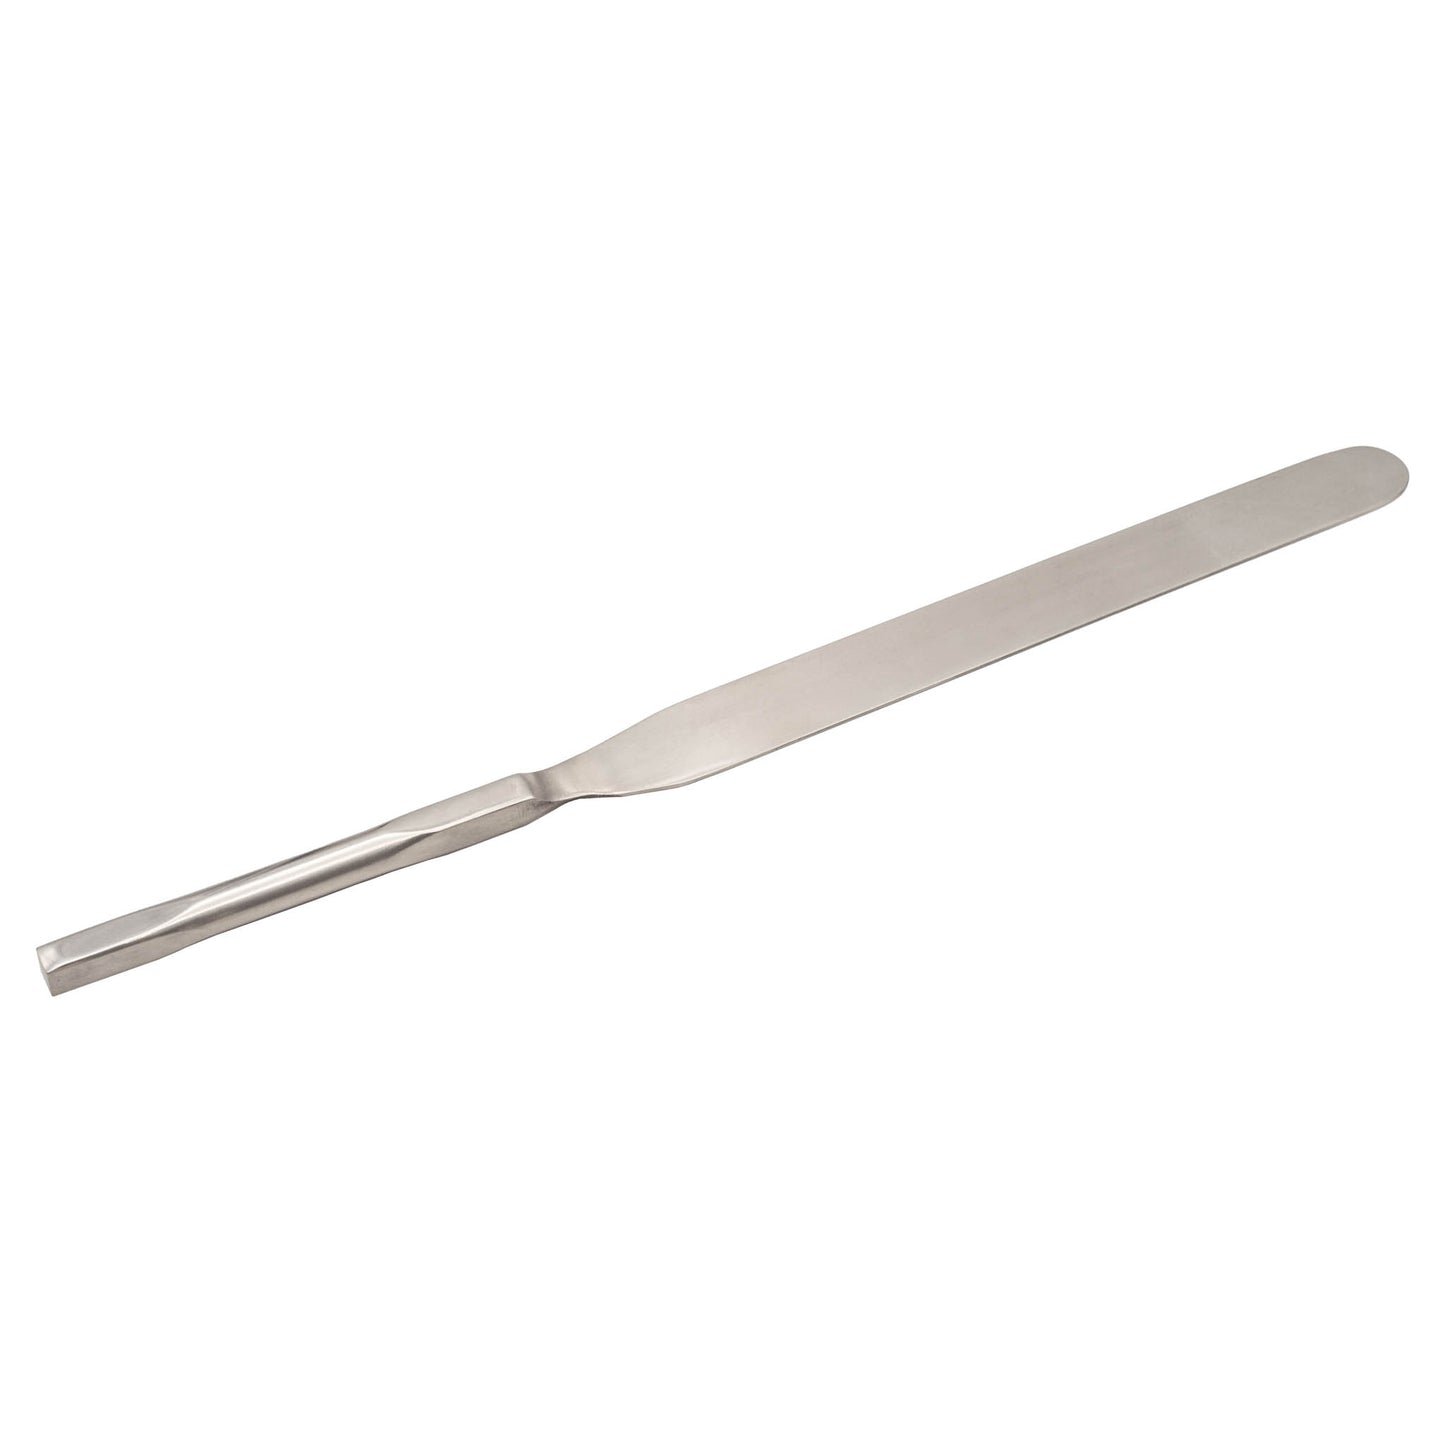 One piece stainless steel cheese curd knife.  380mm long, blade is 250mm long with no sharp edge.